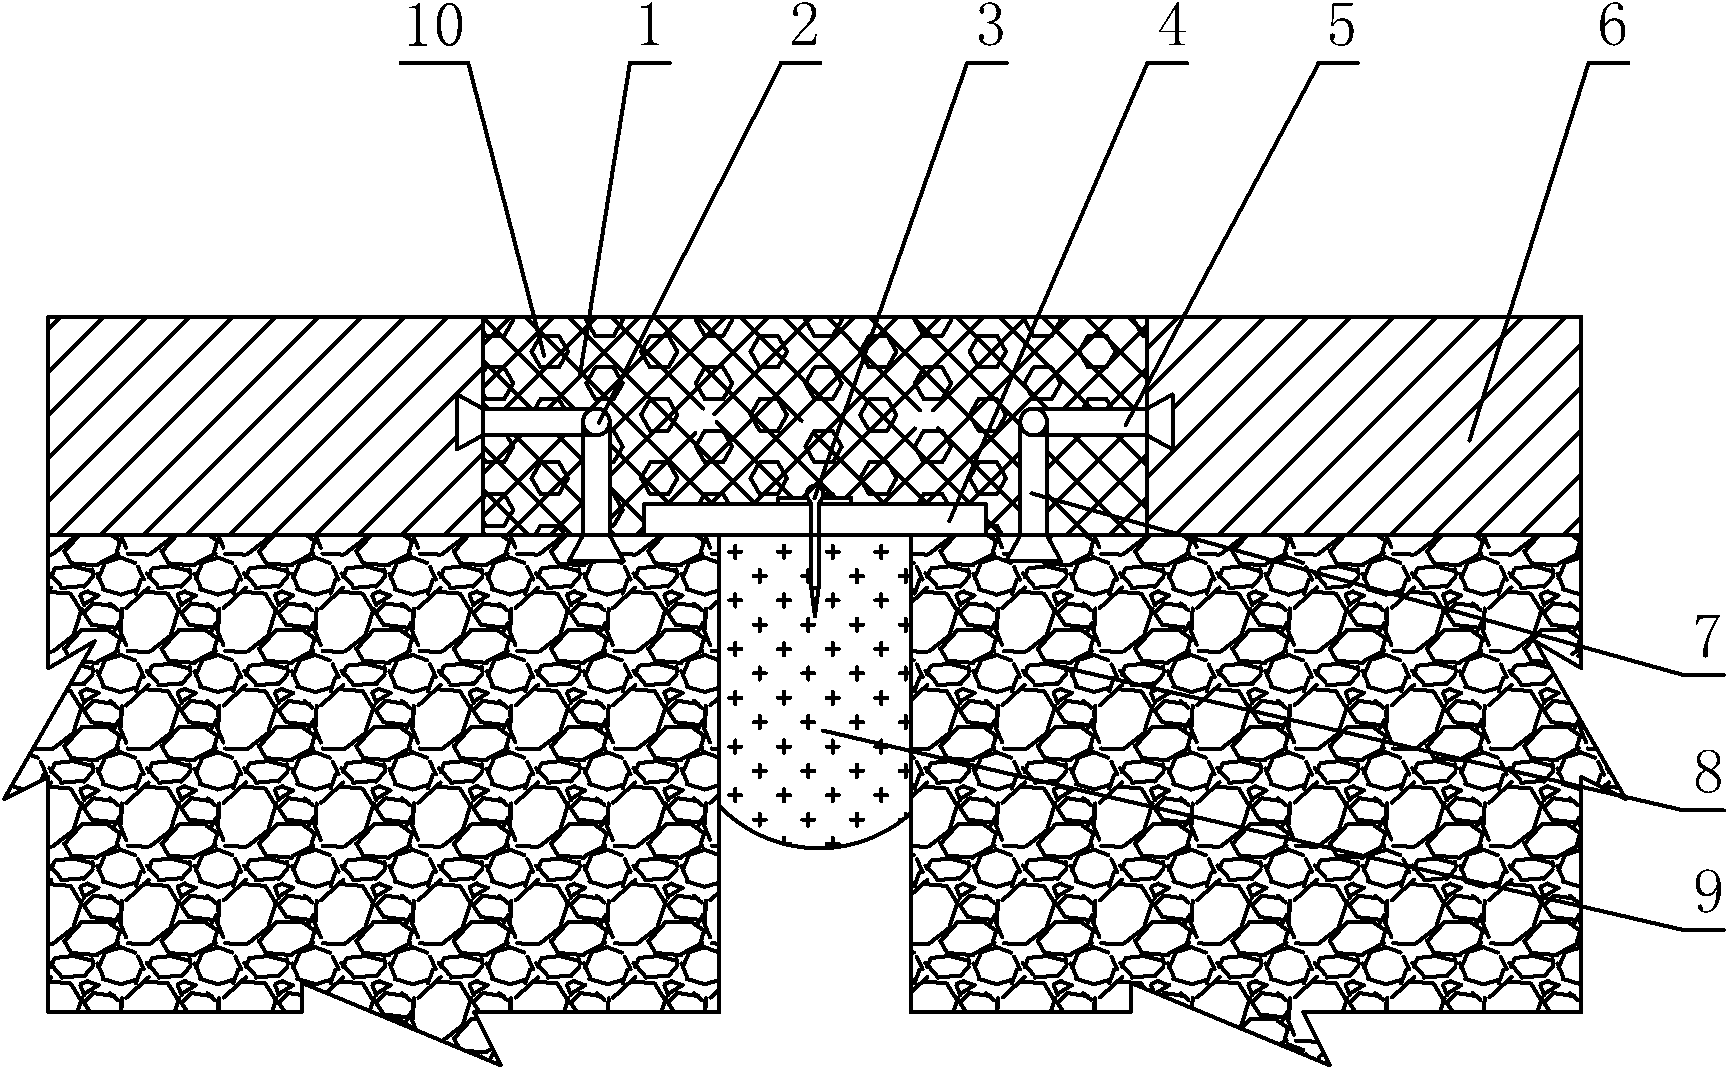 Elastoplastic device for expansion joints in buildings and road engineering